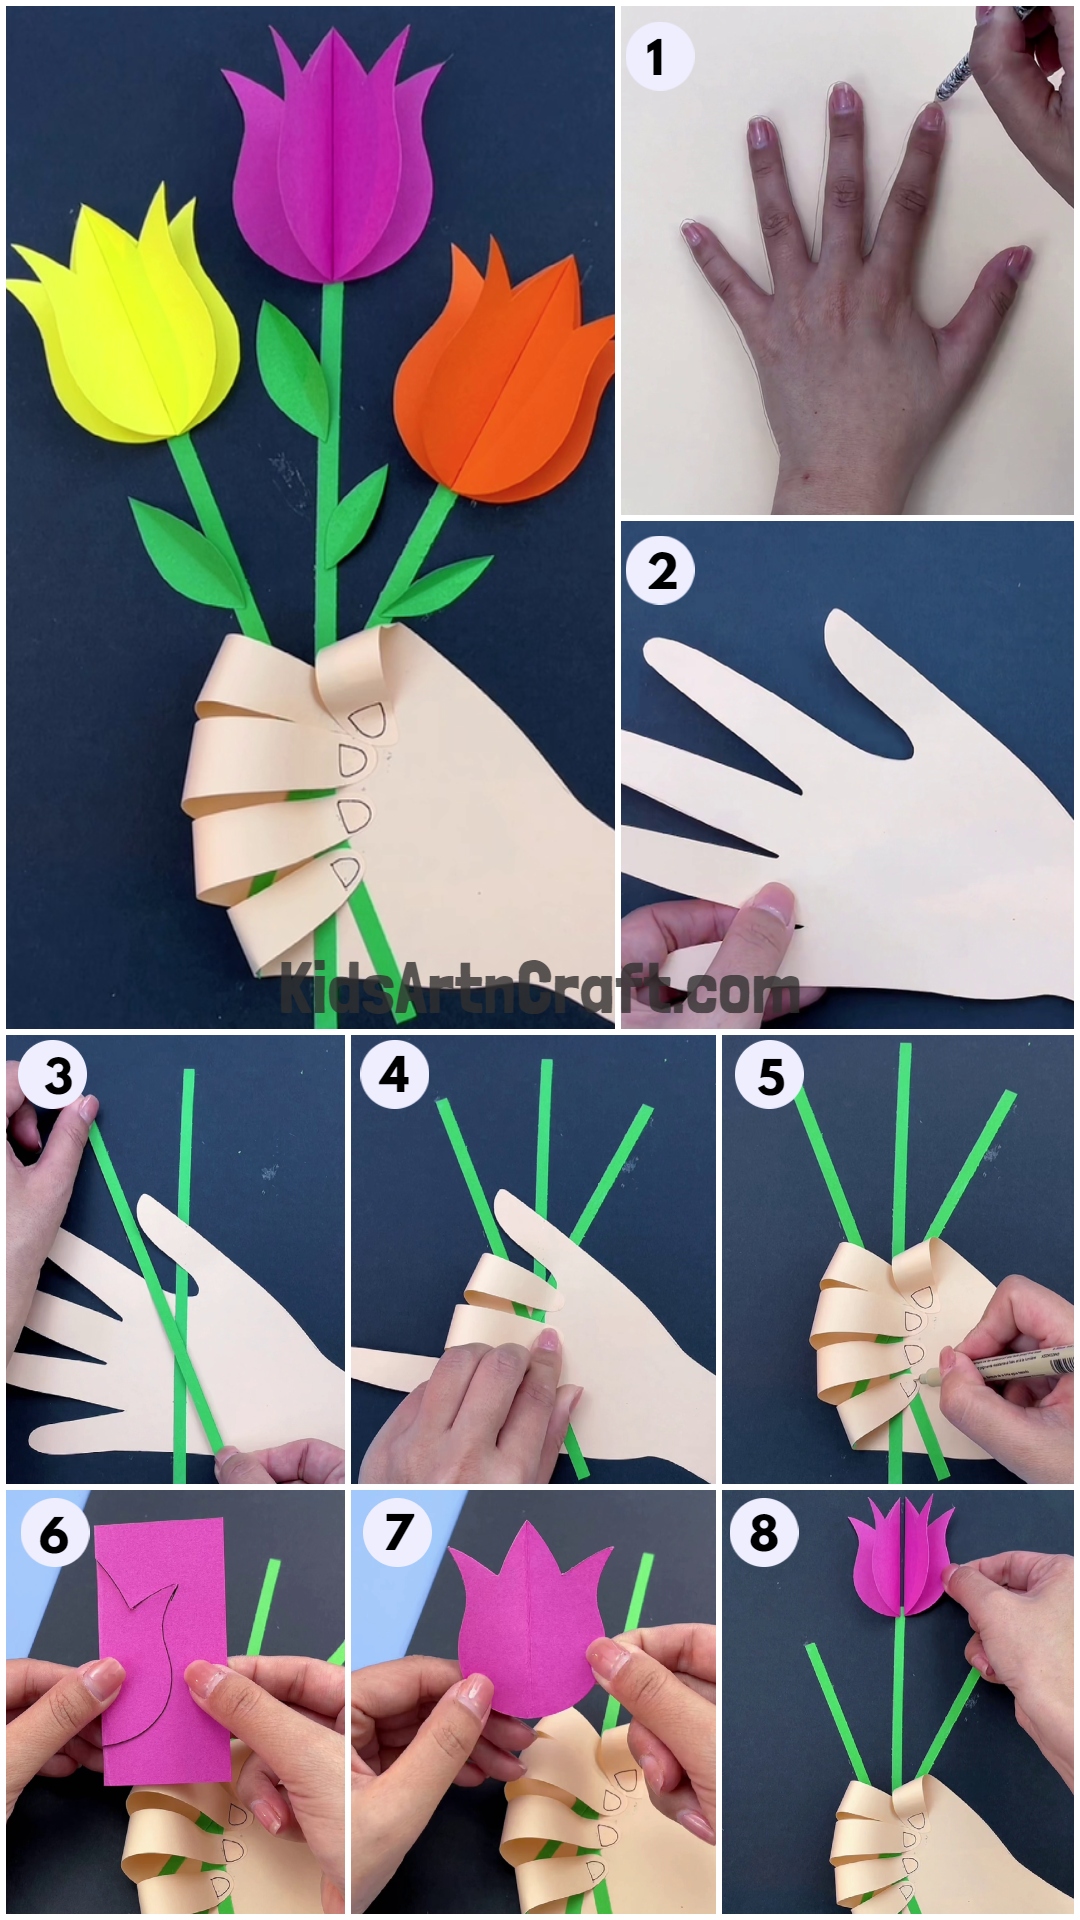 Create a bouquet of flowers out of handprints for Mother's Day - Handprint Flower Bouquet Craft for Mother's Day